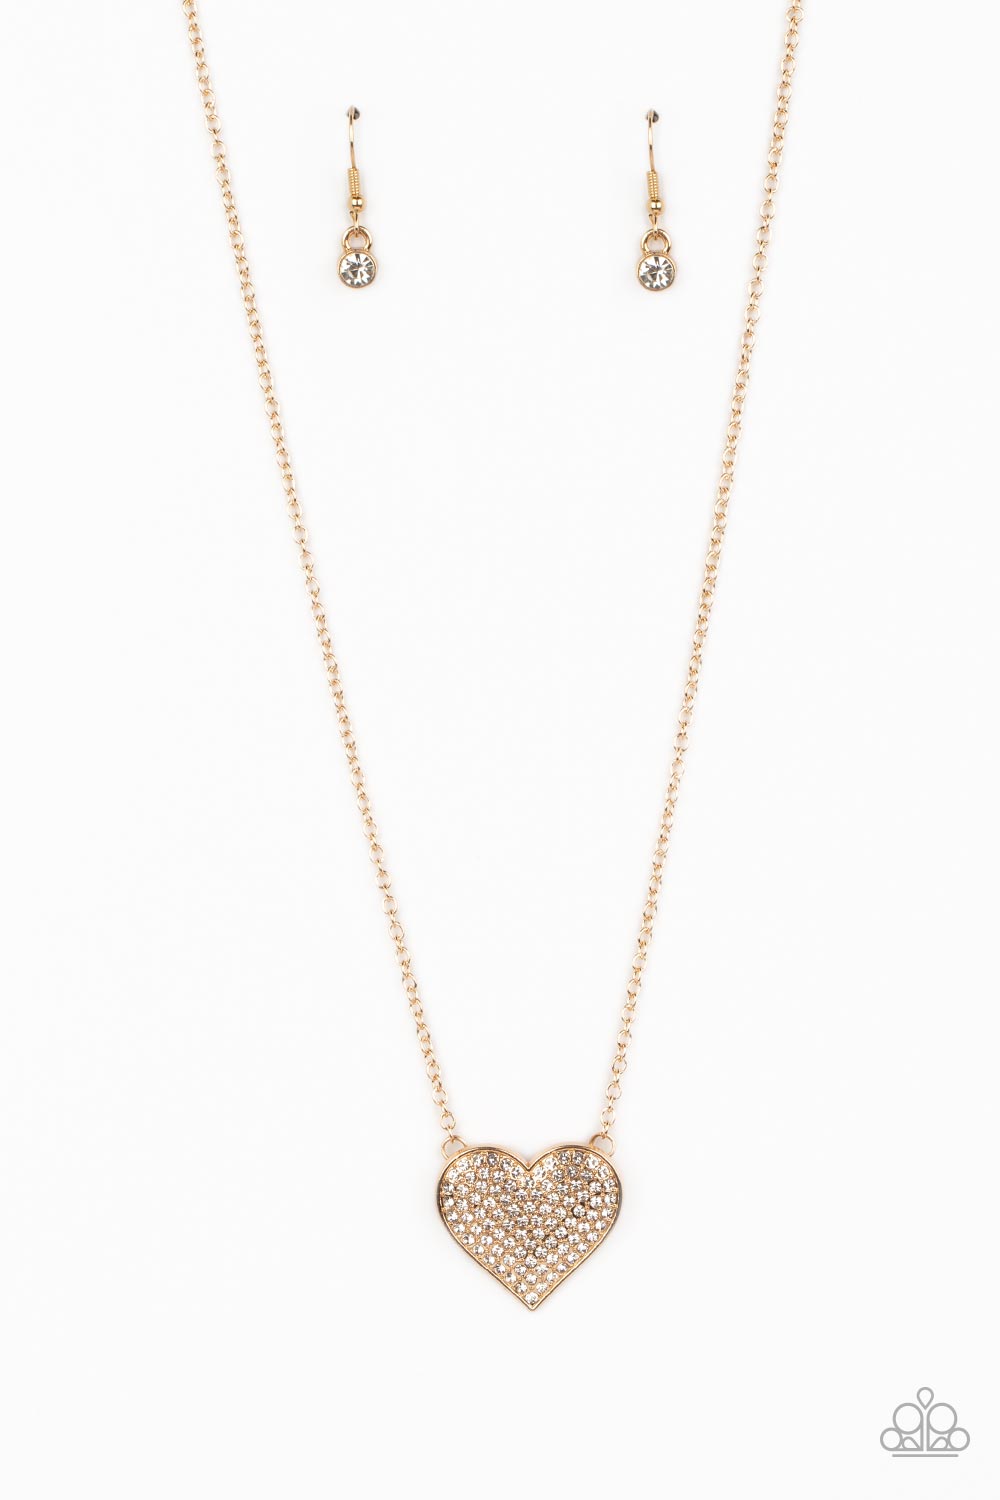 Paparazzi Accessories - Spellbinding Sweetheart #N56 Box 1 - Gold Necklace